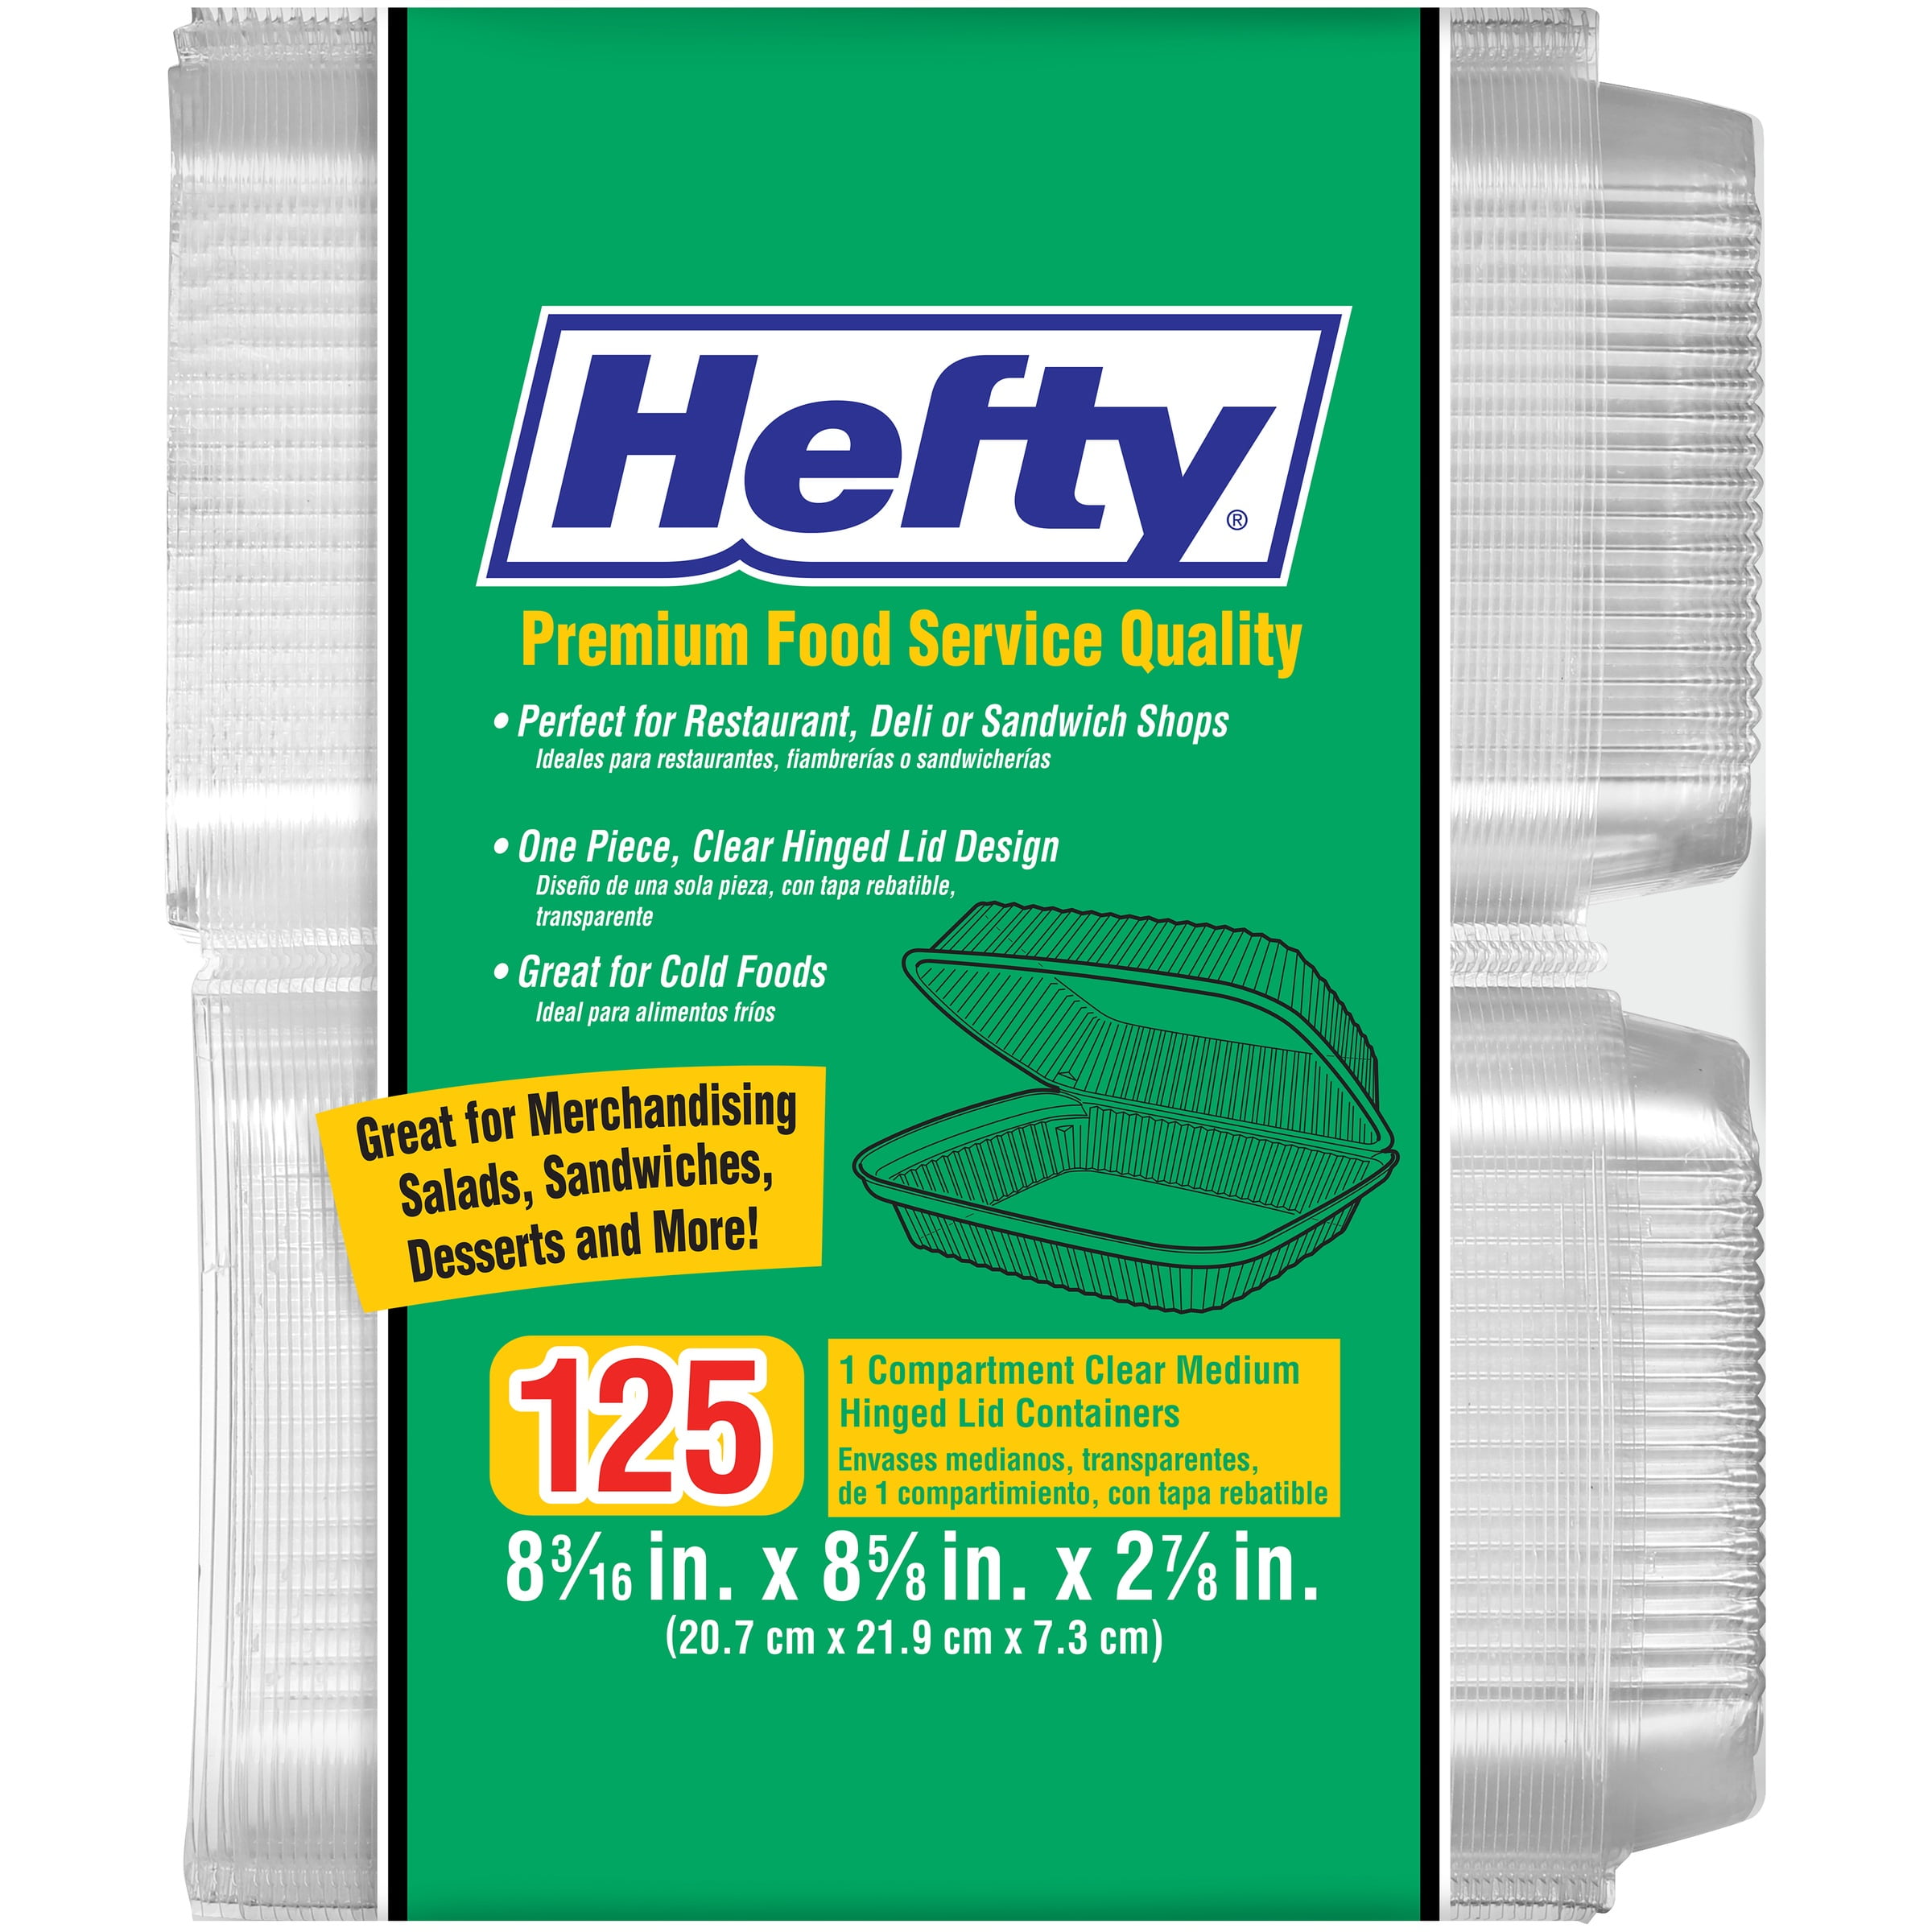 Hefty™ 1 Compartment Clear Medium Hinged Lid Containers 125 ct Bag 